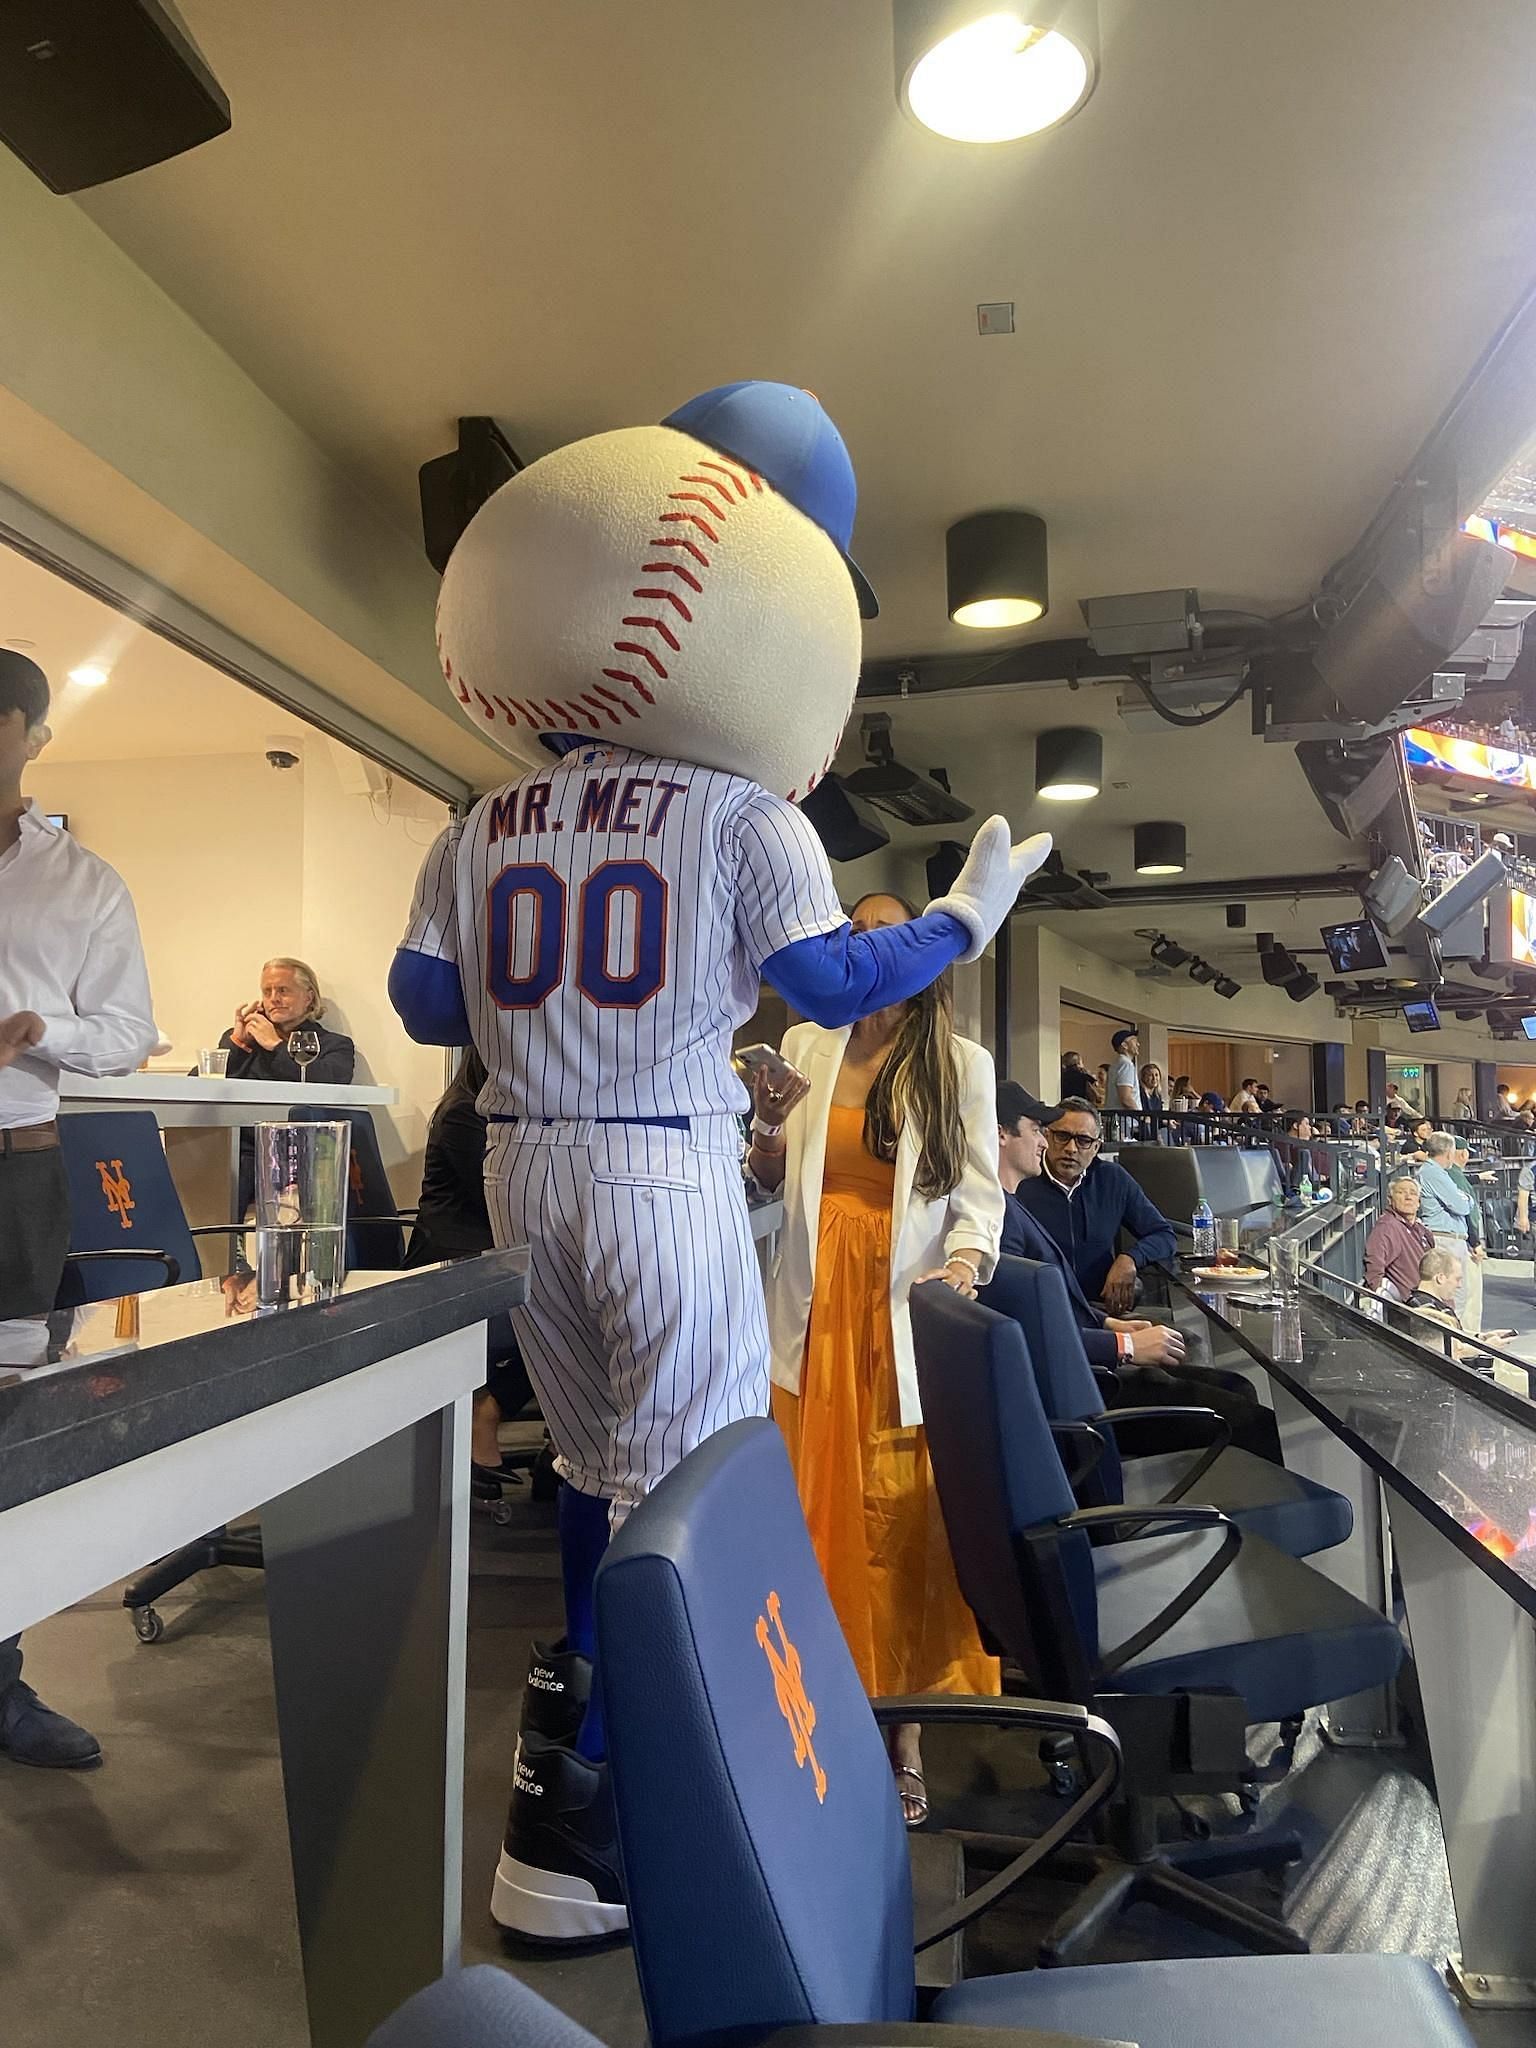 Mr. Met doing his customary rounds in the Mets executive suite Courtesy: r/baseball Image credits: Reddit